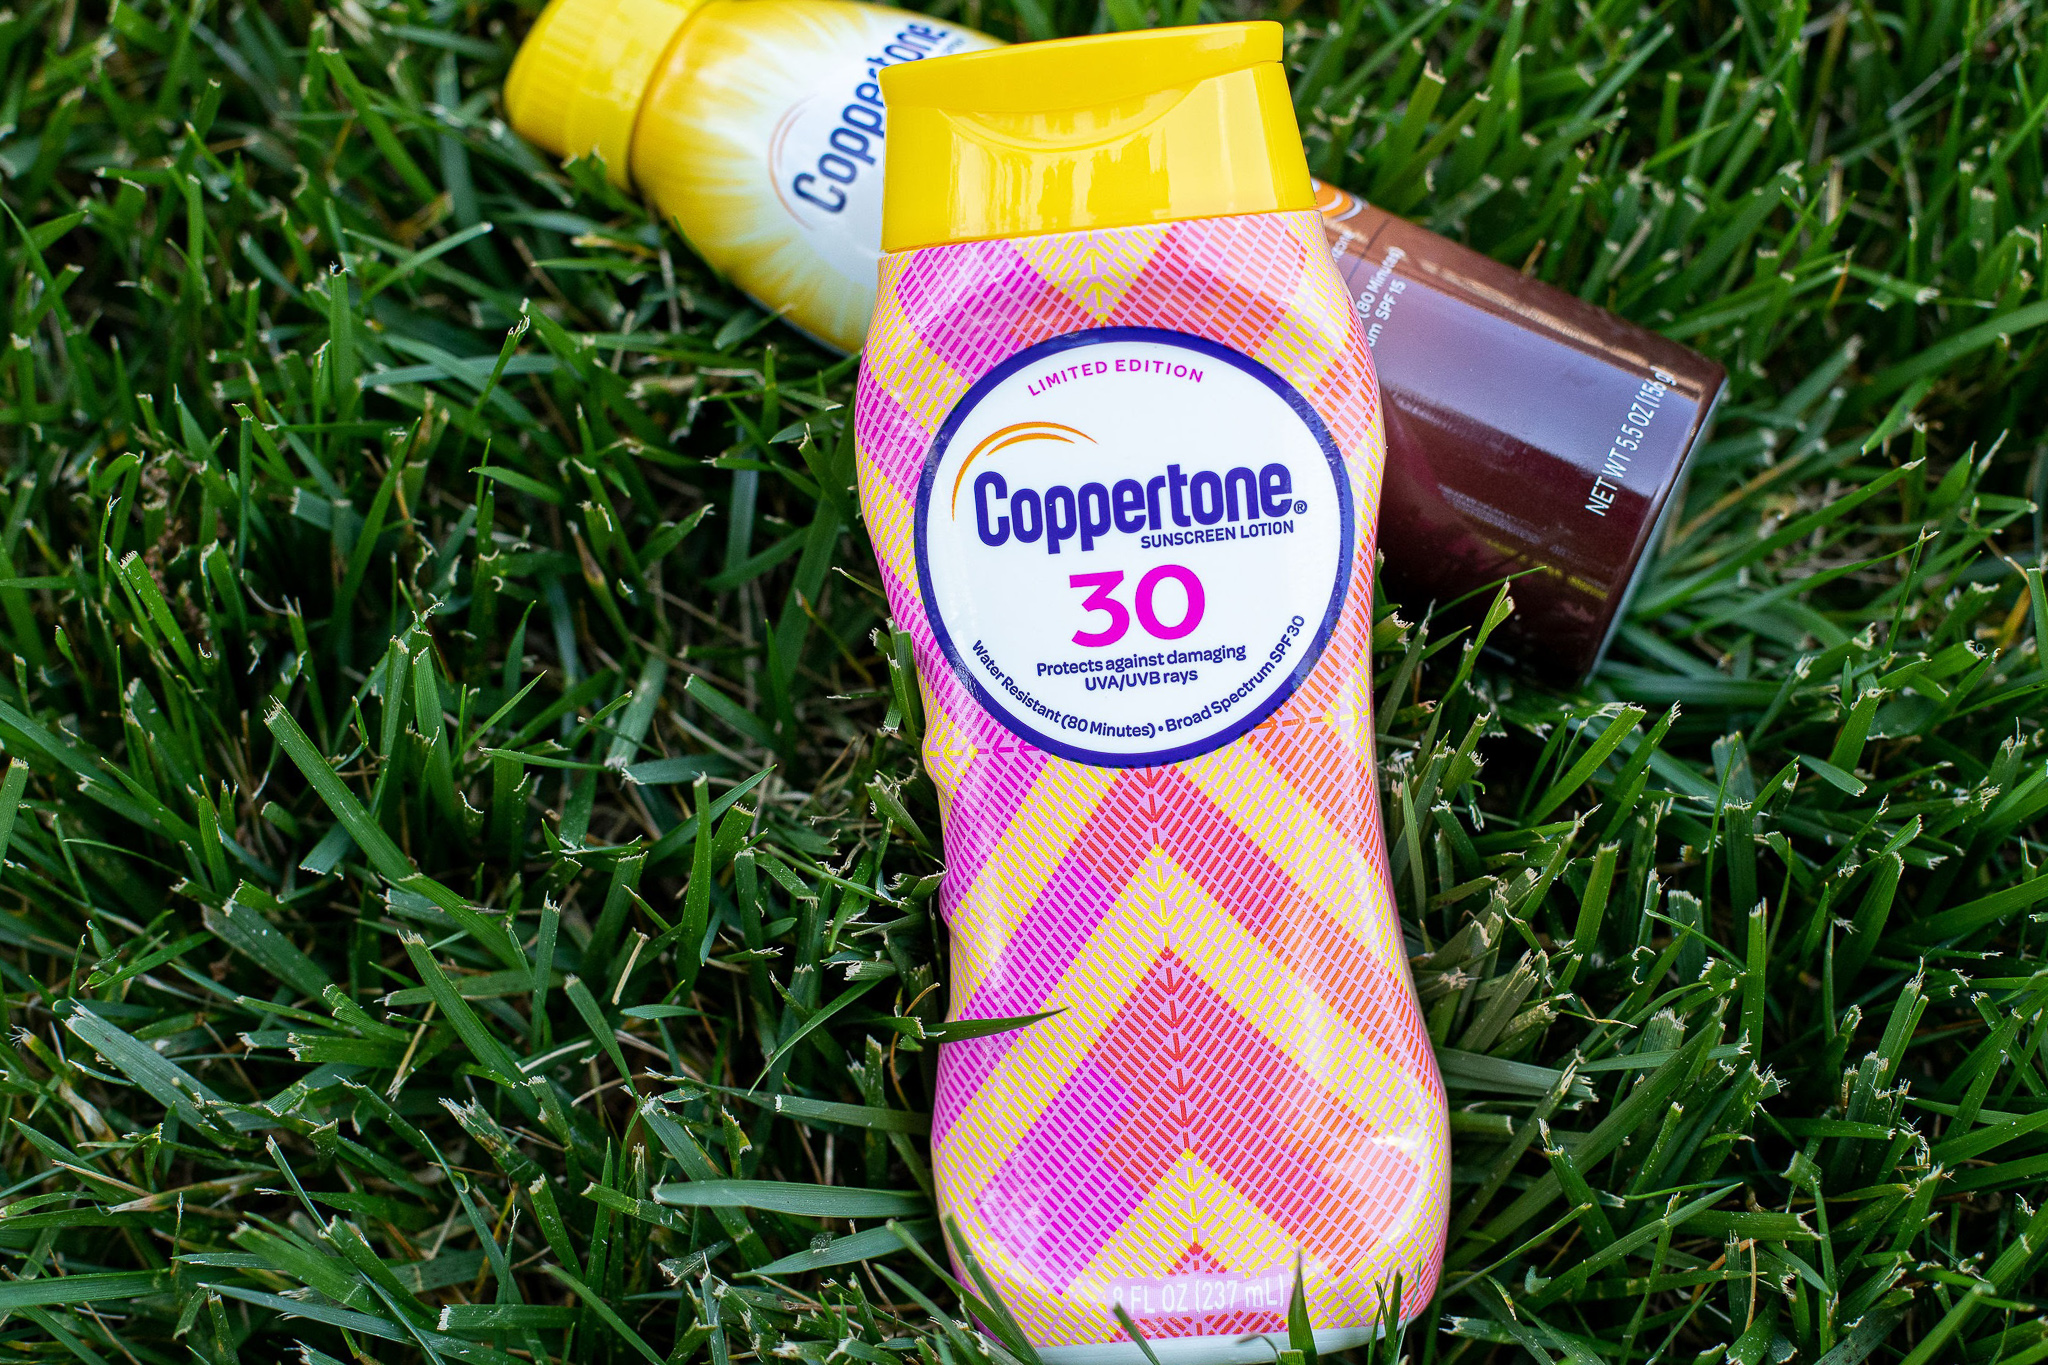 Coppertone Sunscreen As Low As $4.49 At Kroger